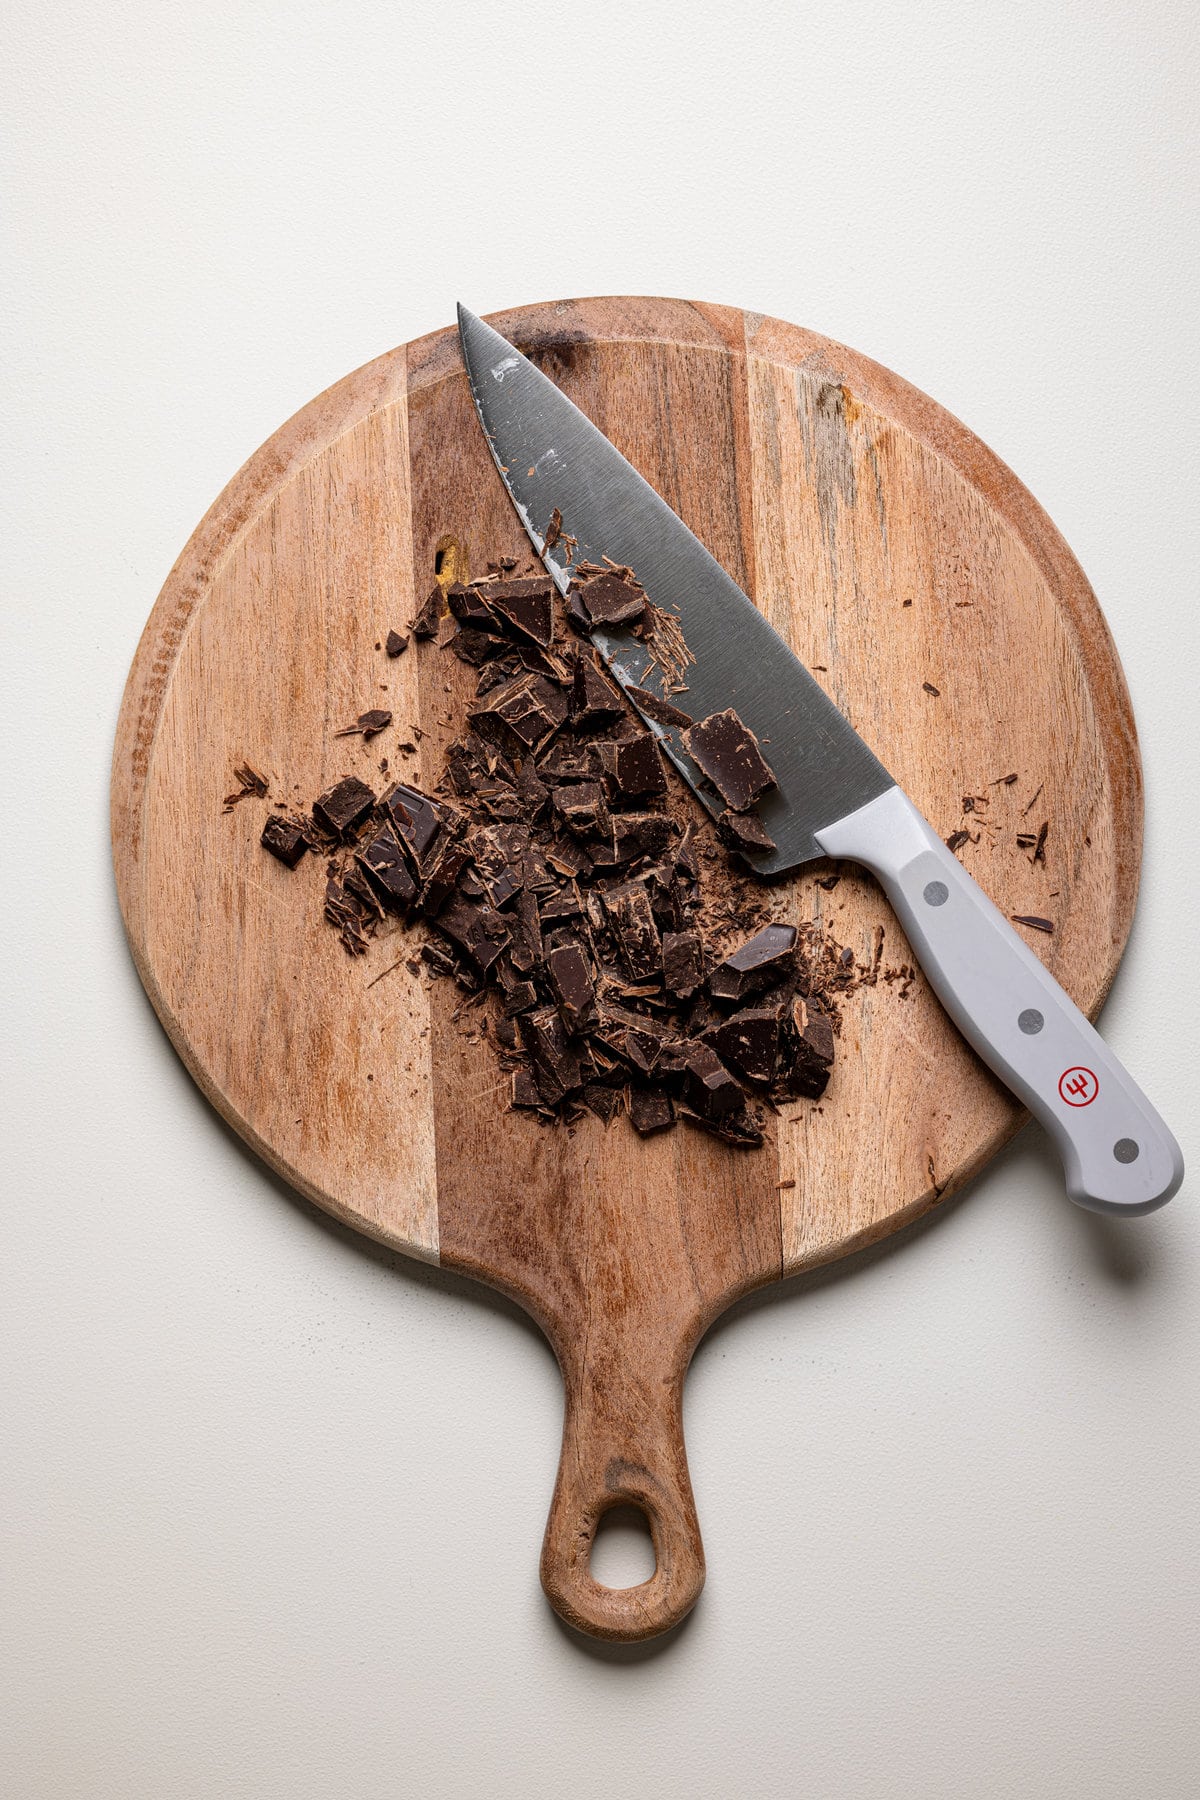 Crushed chocolate and a knife on a wooden cutting board.